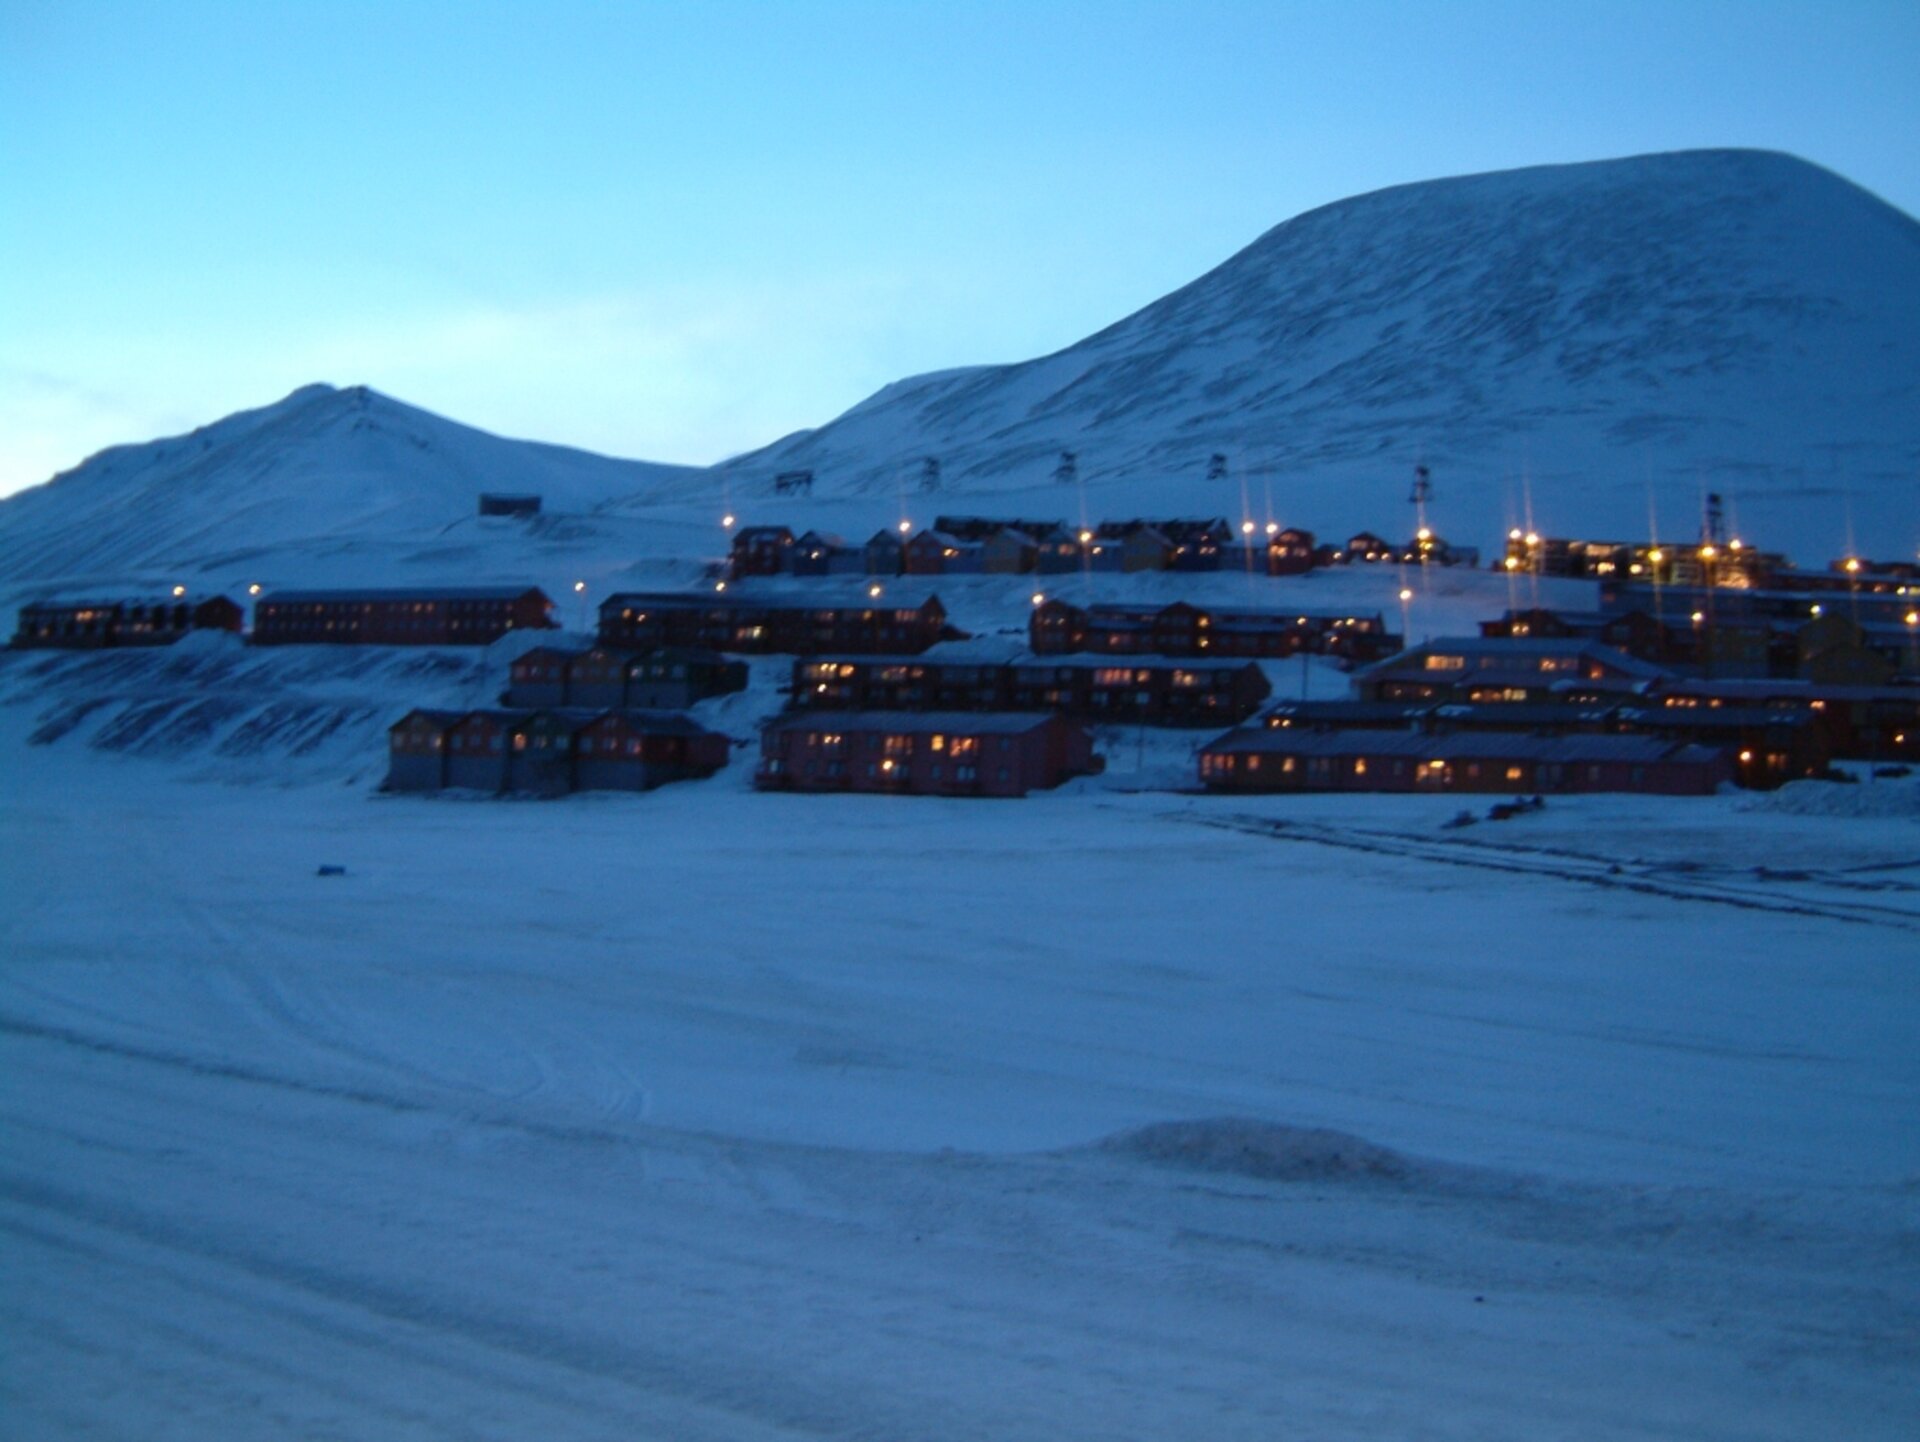 The town of Longyearbyen, home of the Svalsat ground station